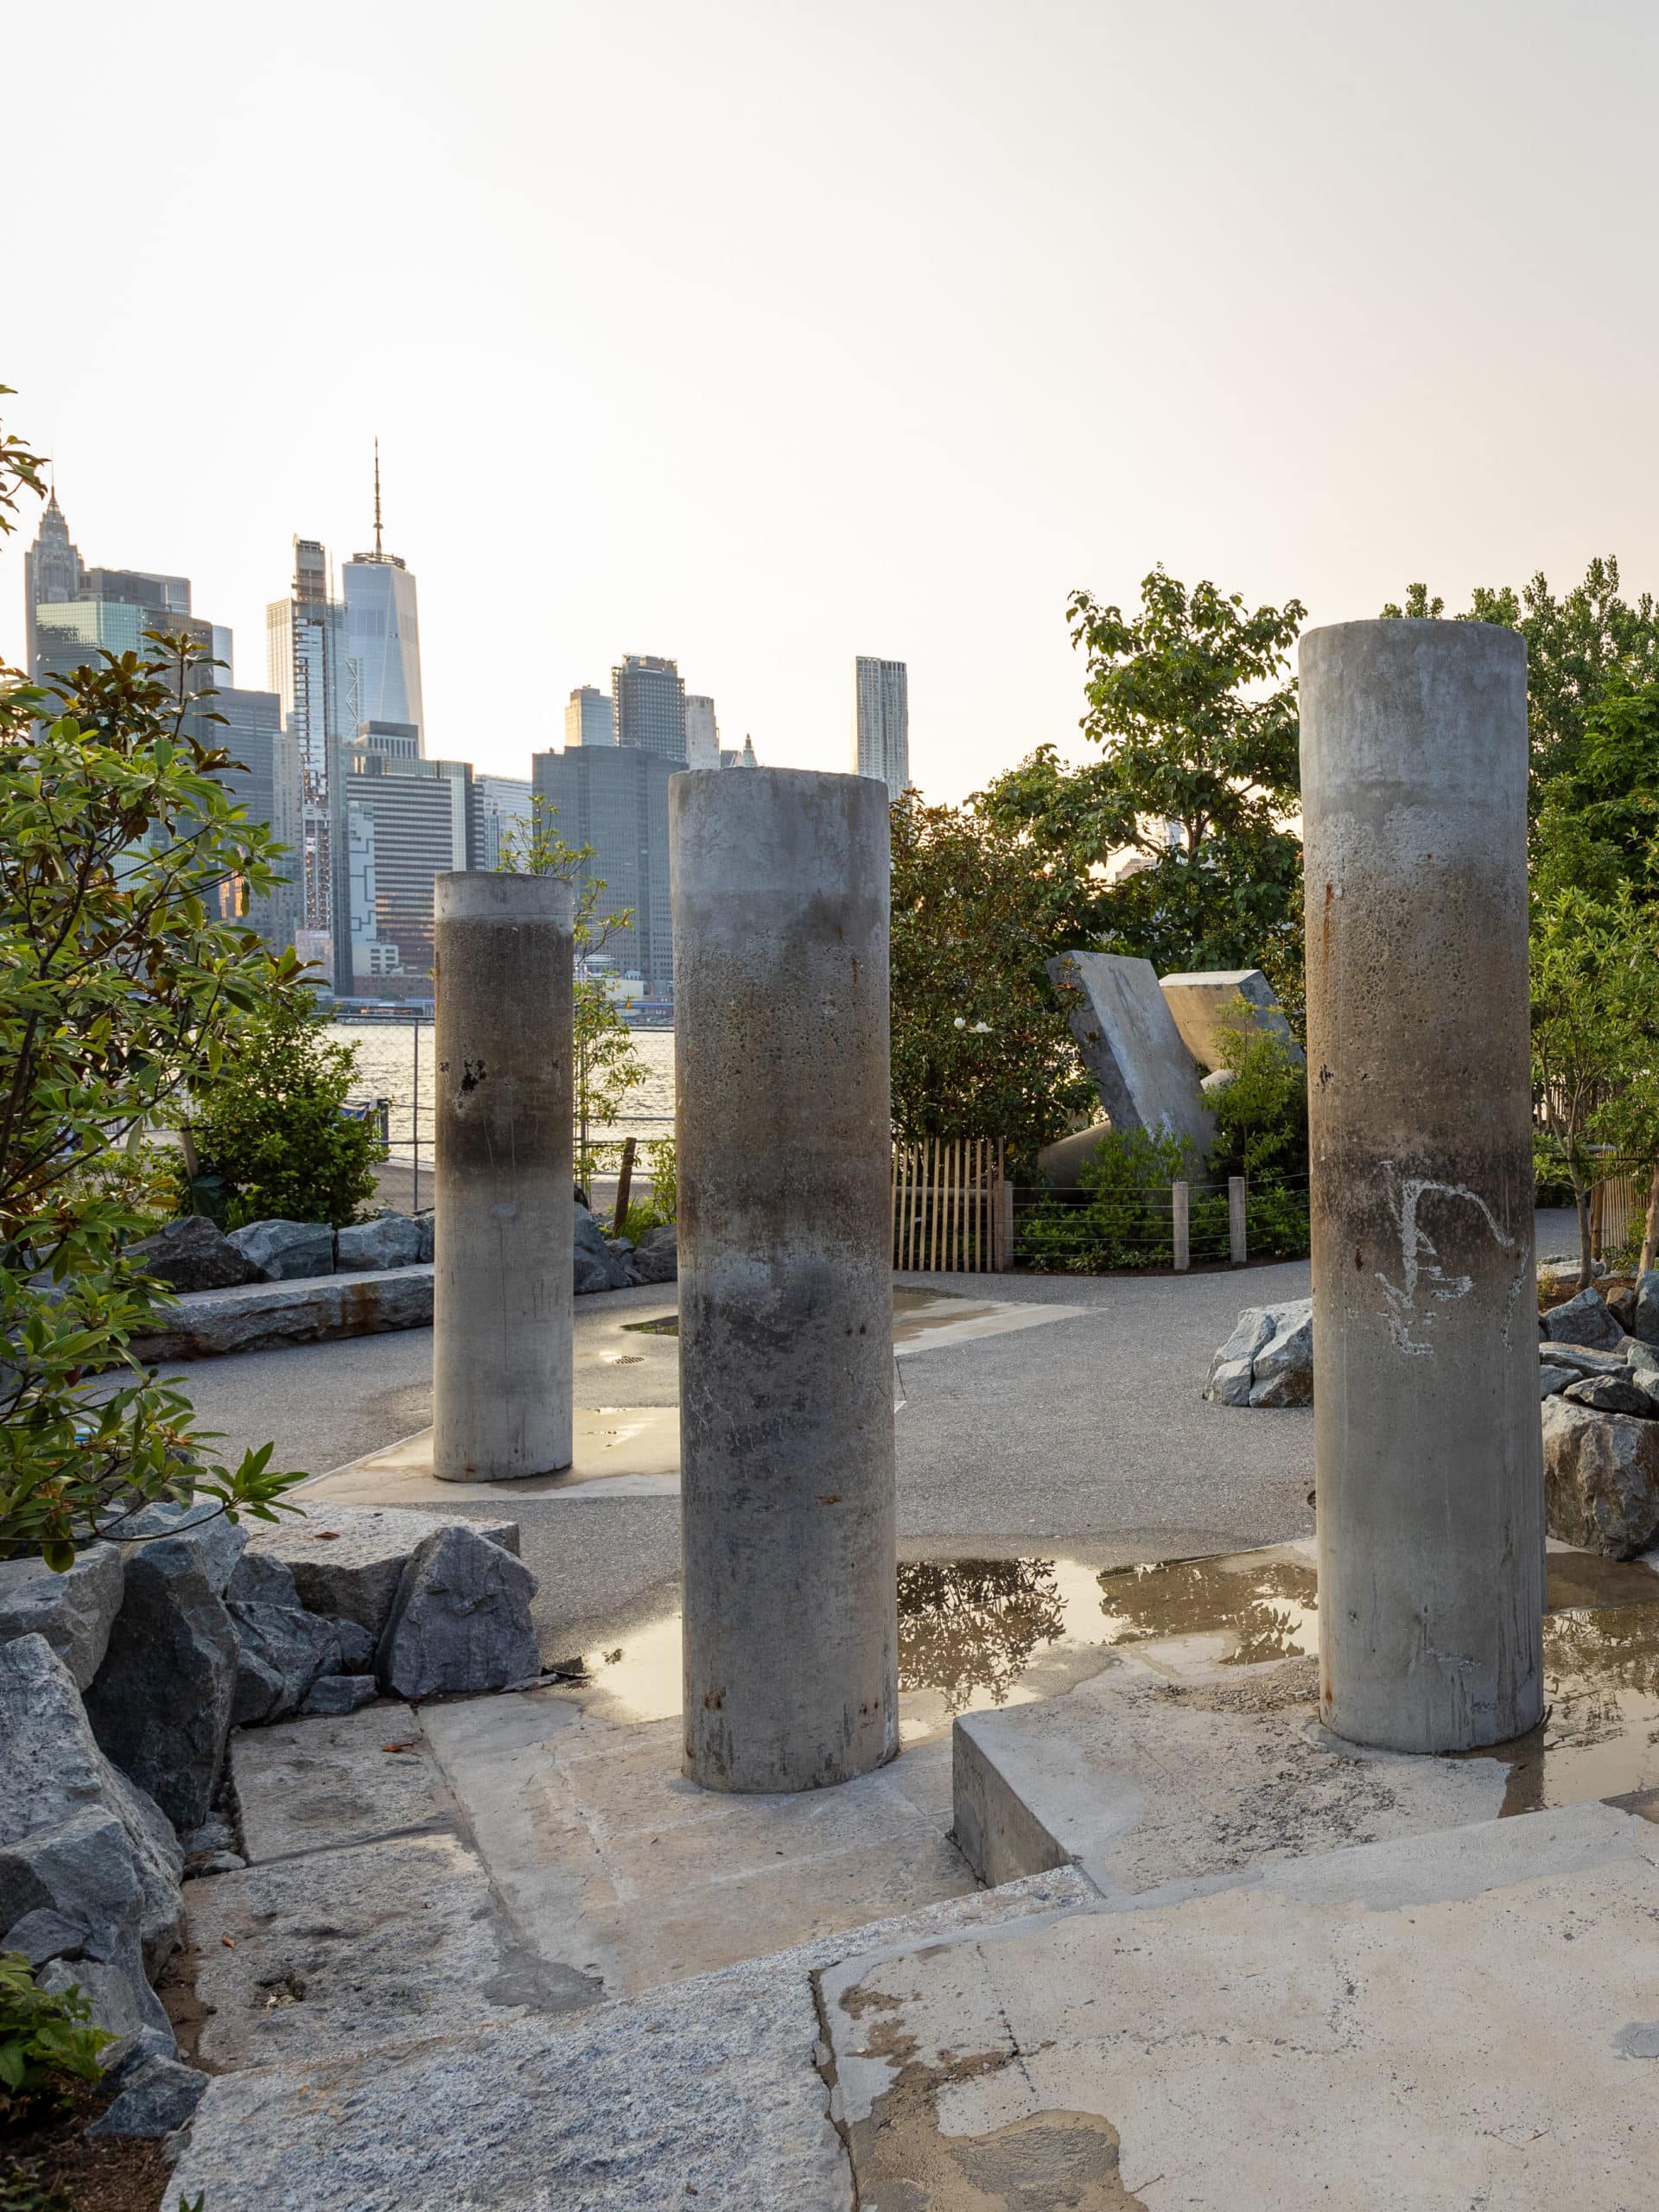 Concrete piles in the Water Area at sunset with a view of lower Manhattan